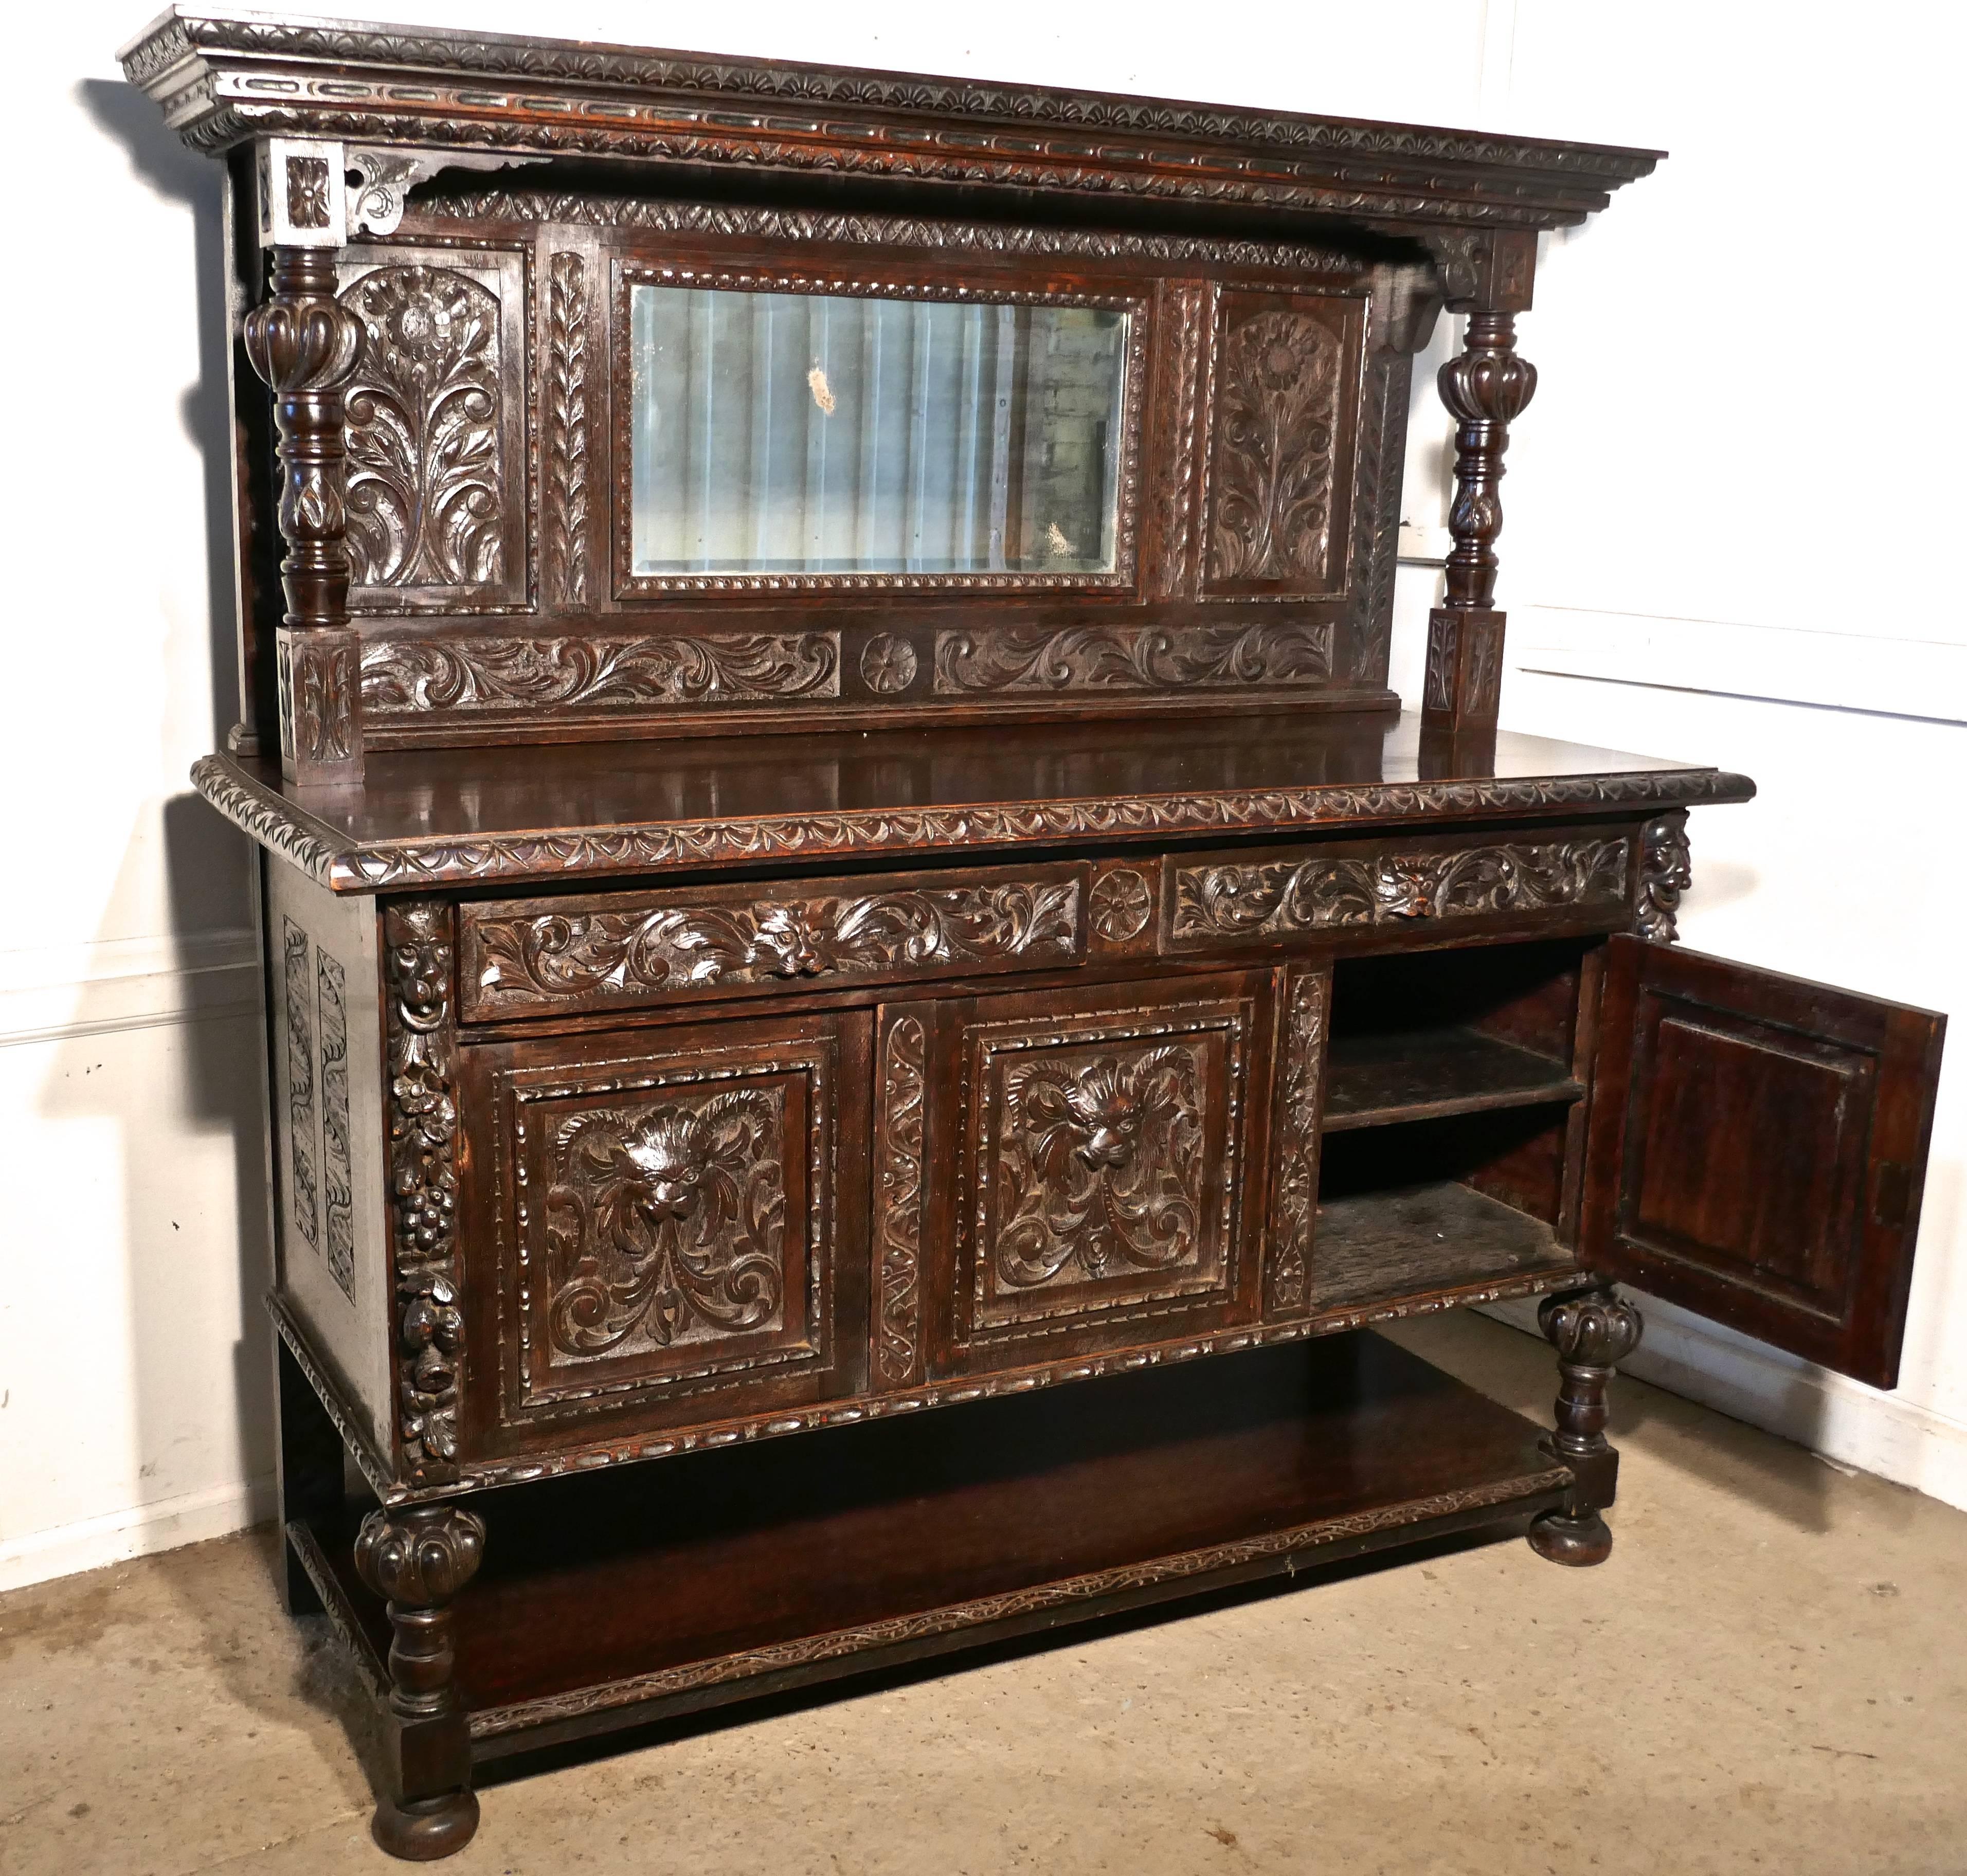 This is a superb and large piece but it is not too high, it has superb quality mythical beasts and green man carvings, on the sides as well as the front

The top section has central mirror bordered by carved panels with turned and carved pillars